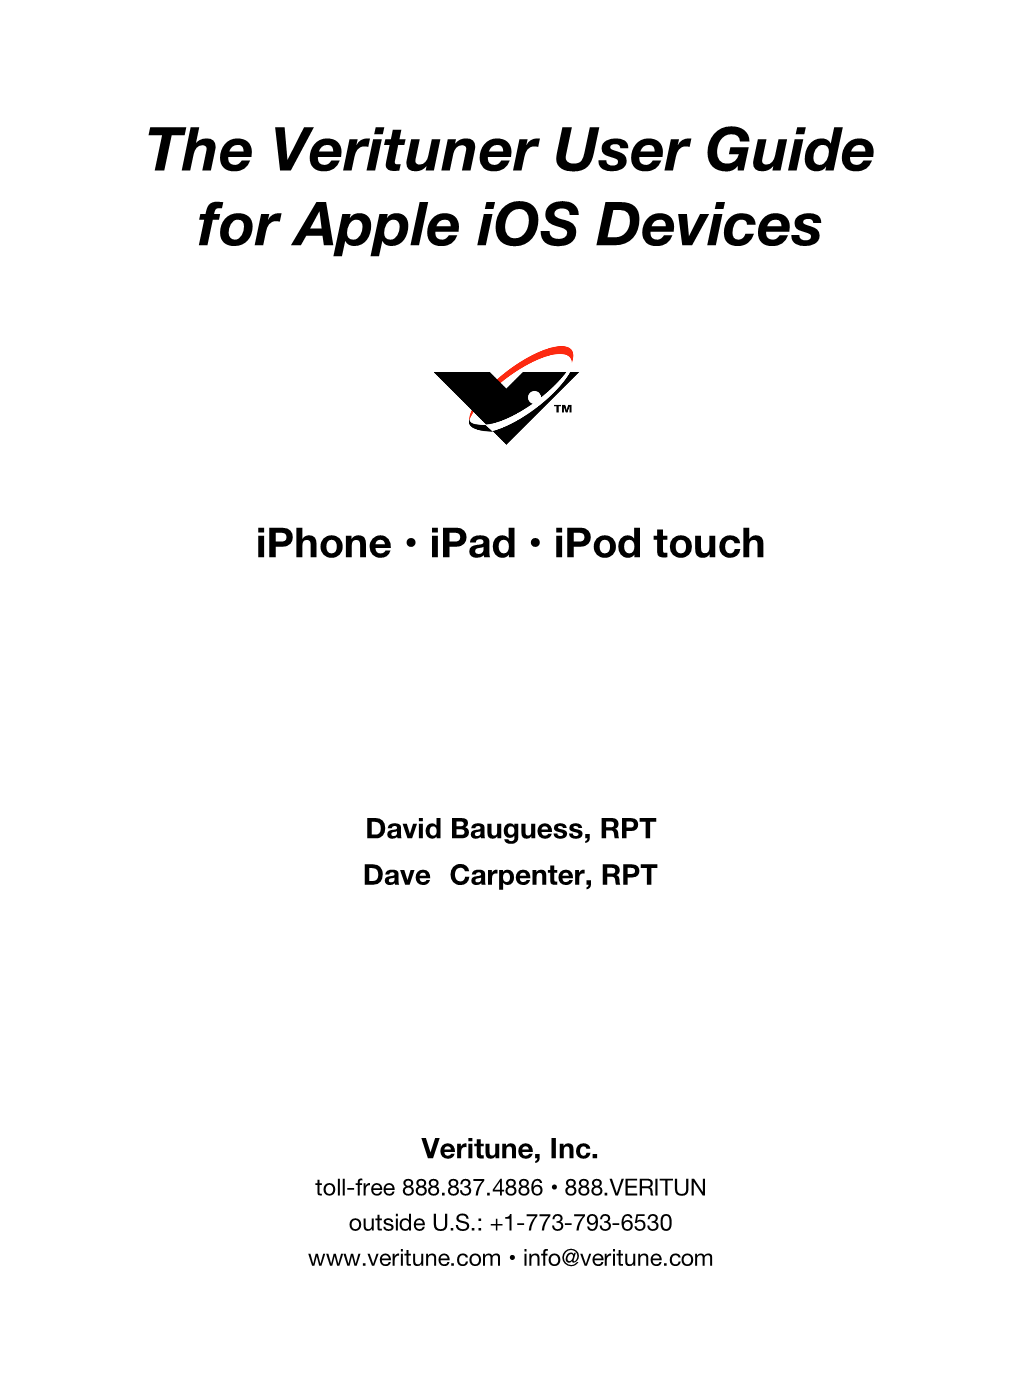 The Verituner User Guide for Apple Ios Devices